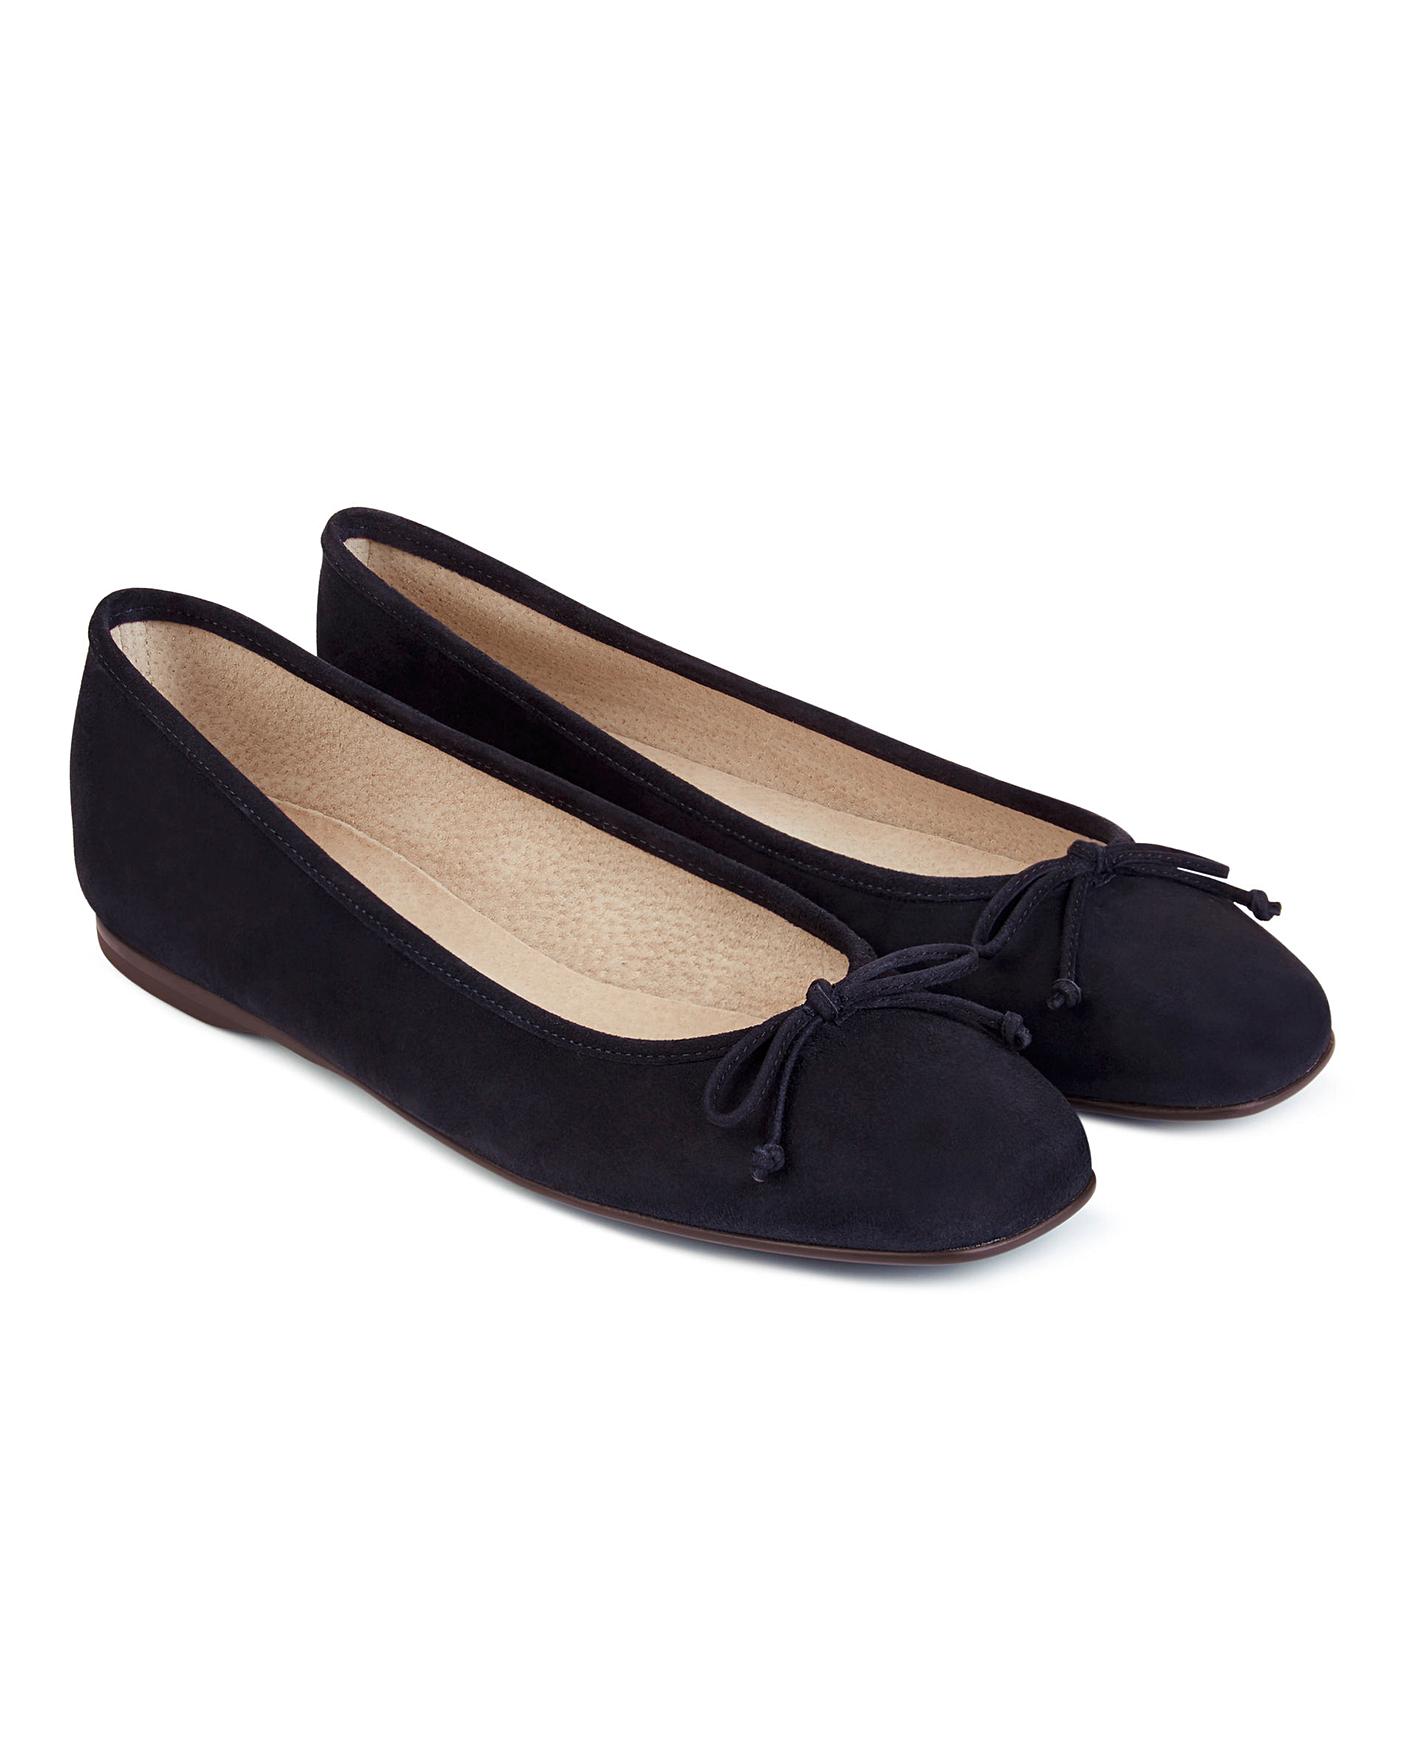 Hobbs Prior Ballerina Shoes | Simply Be